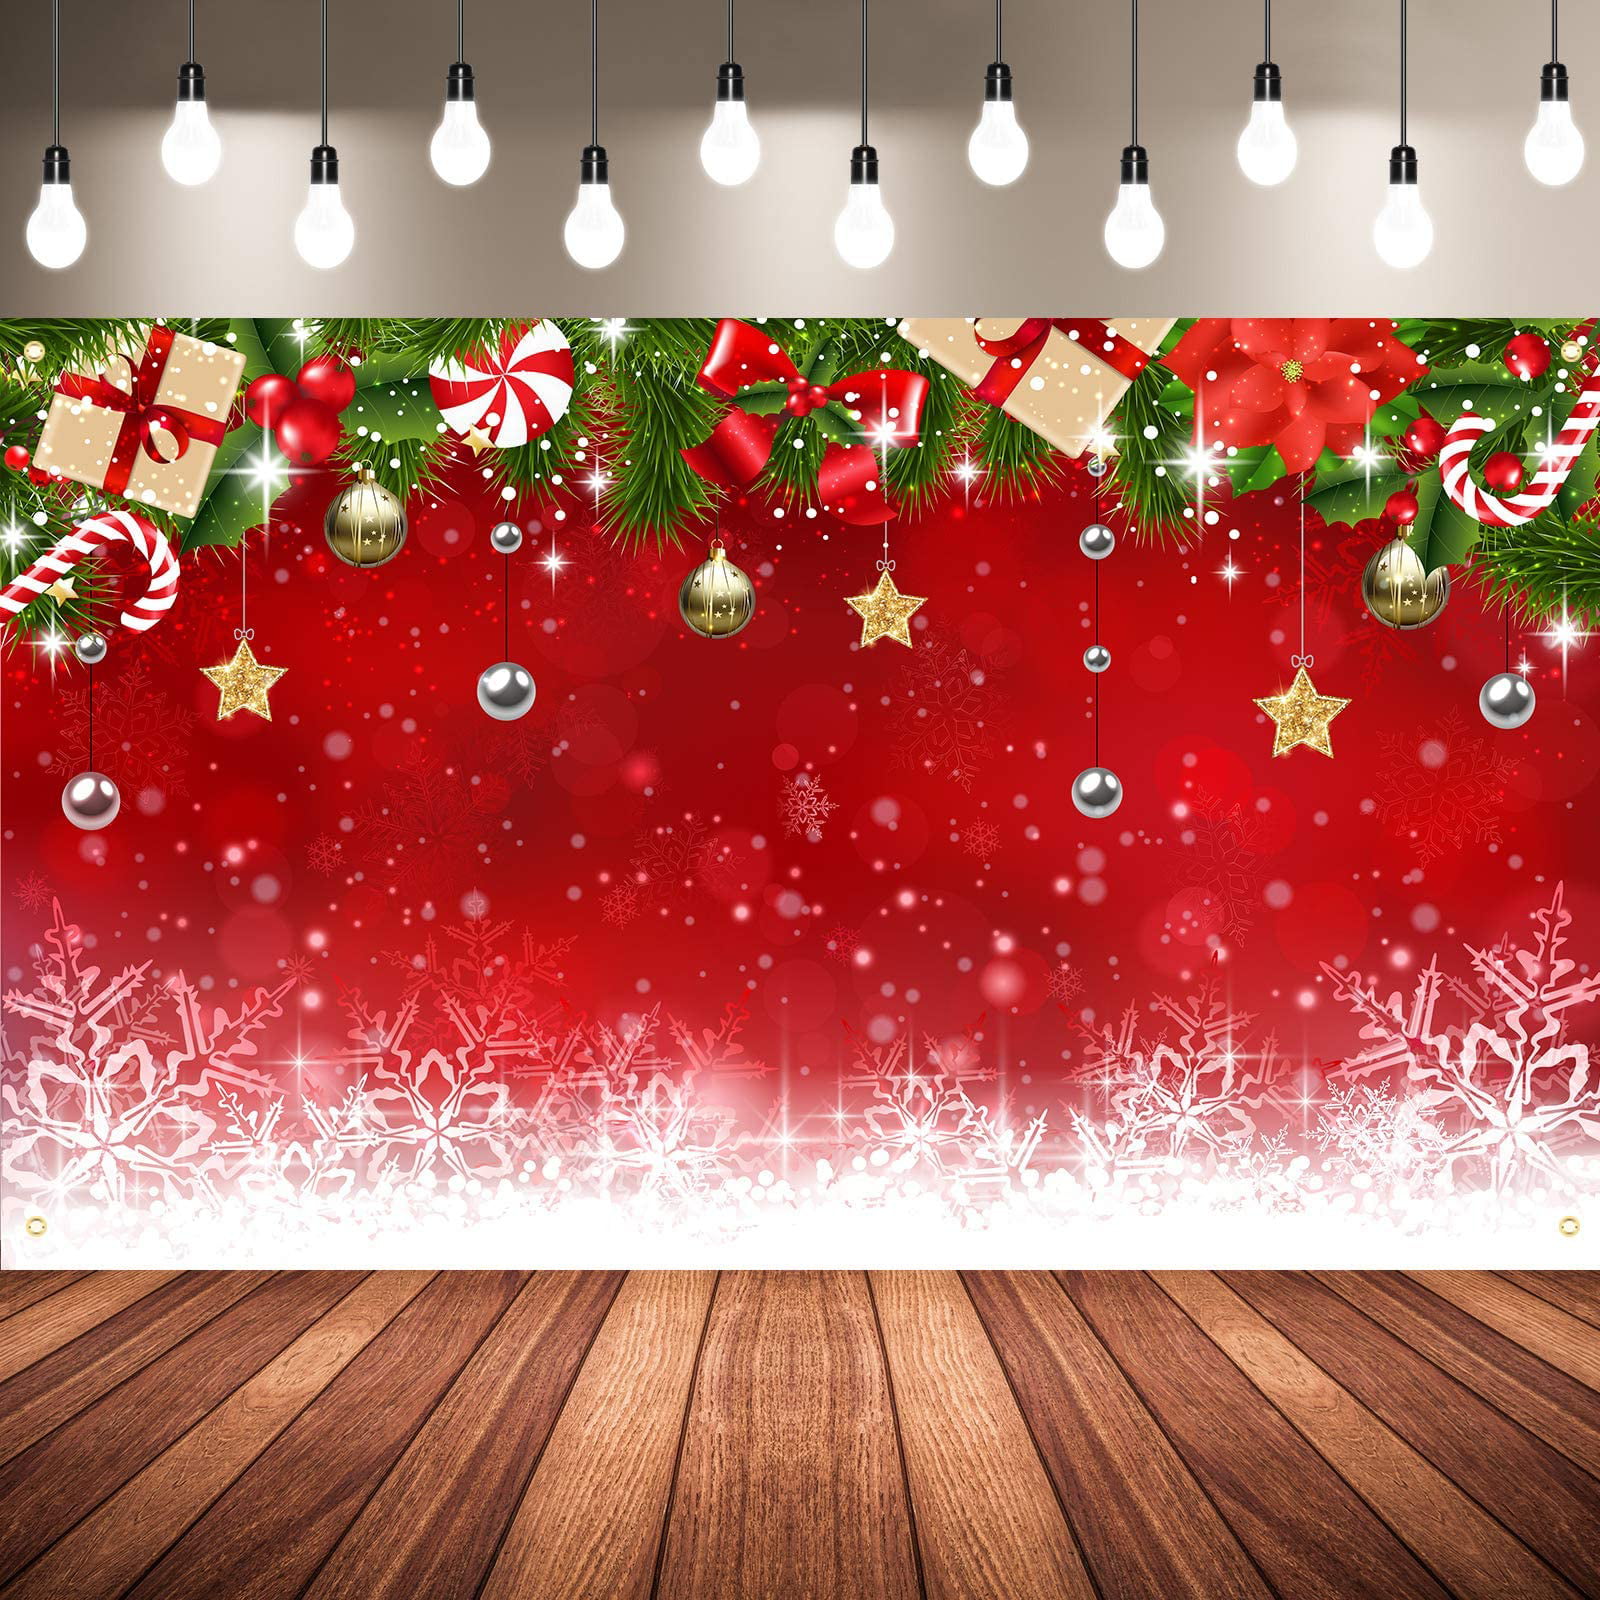 6x9ft Vinyl Merry Christmas Festival Holiday Celebration Background Outdoor Snowing Wood Lantern Red Candle Balls Wood Plank Floor Photo Shooting Backdrop 